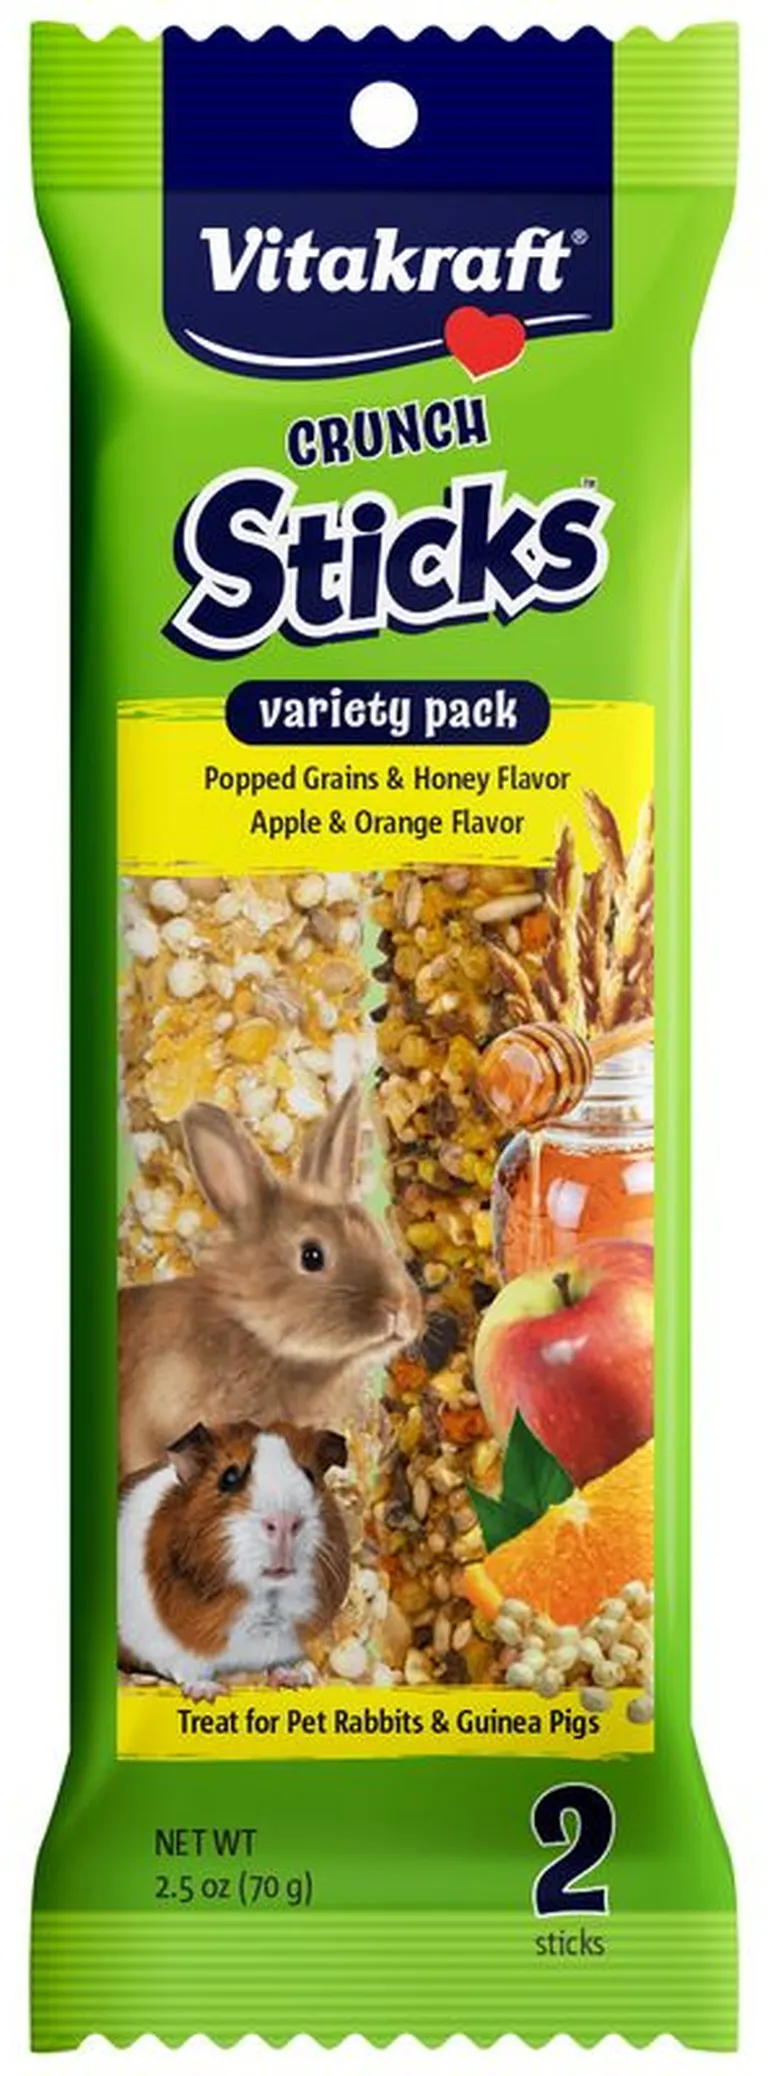 Vitakraft Crunch Sticks Variety Pack Rabbit and Guinea Pig Treats Popped Grains and Apple Photo 2